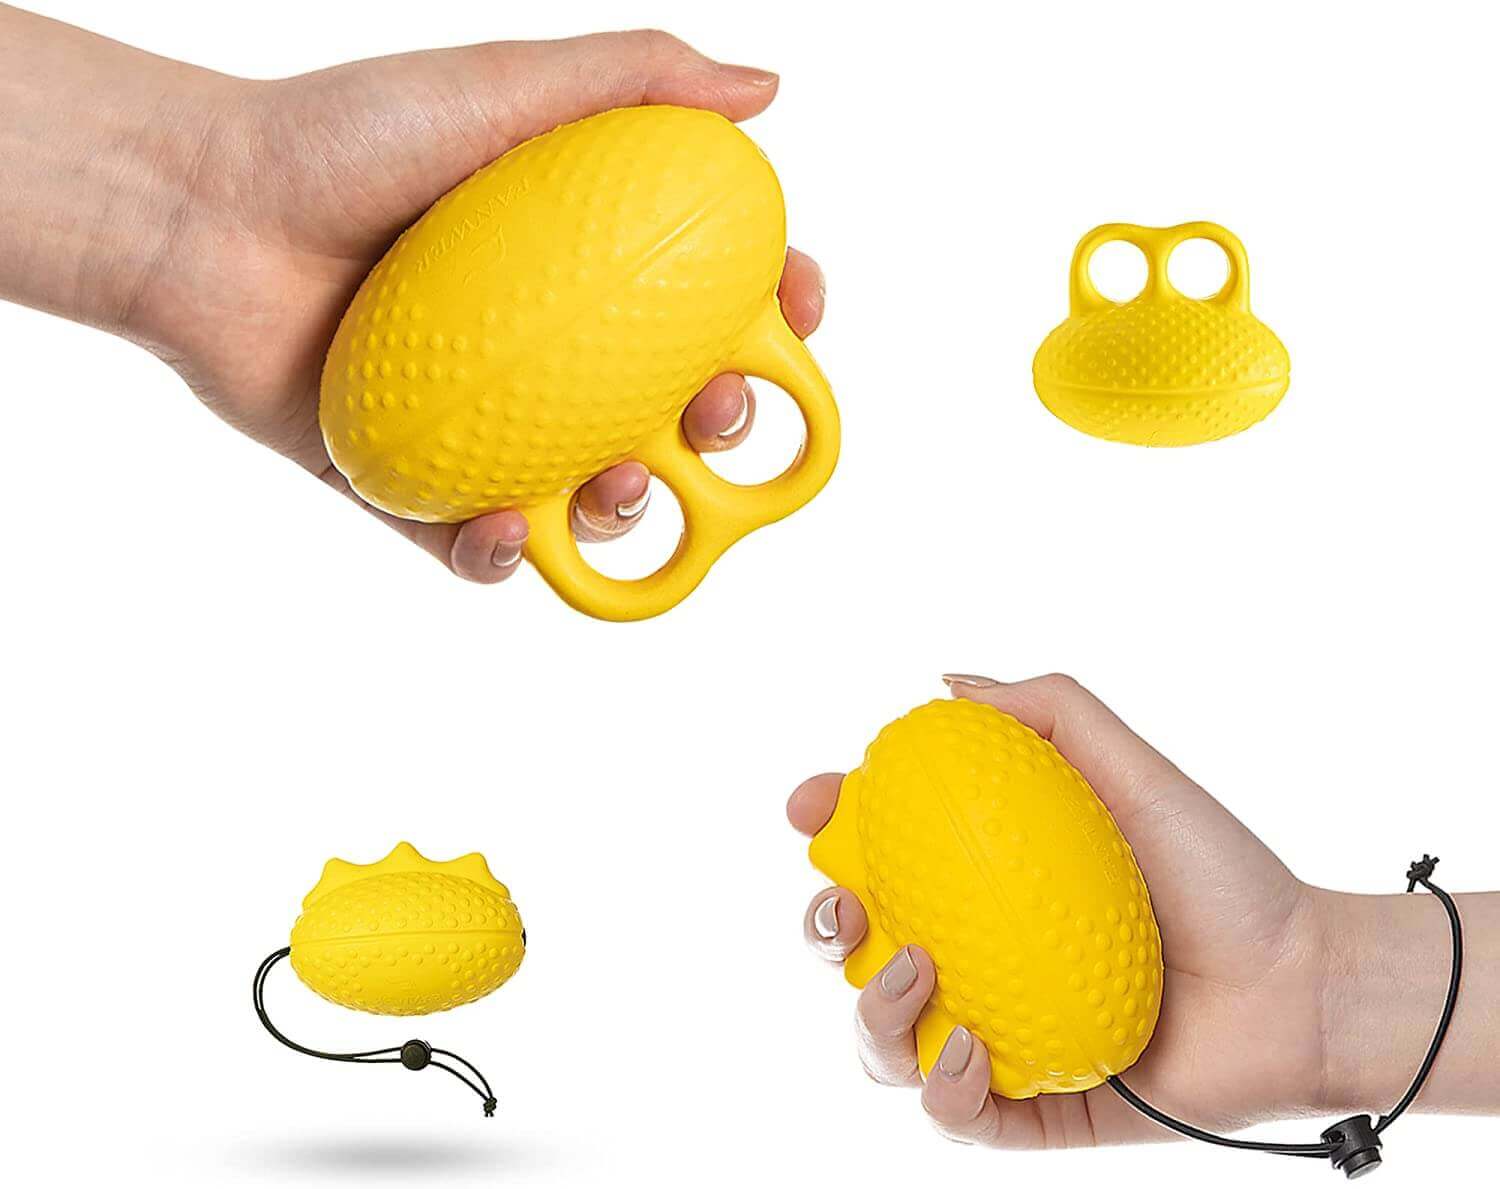 Finger exercise ball and stress ball on adjustable string set, feature image